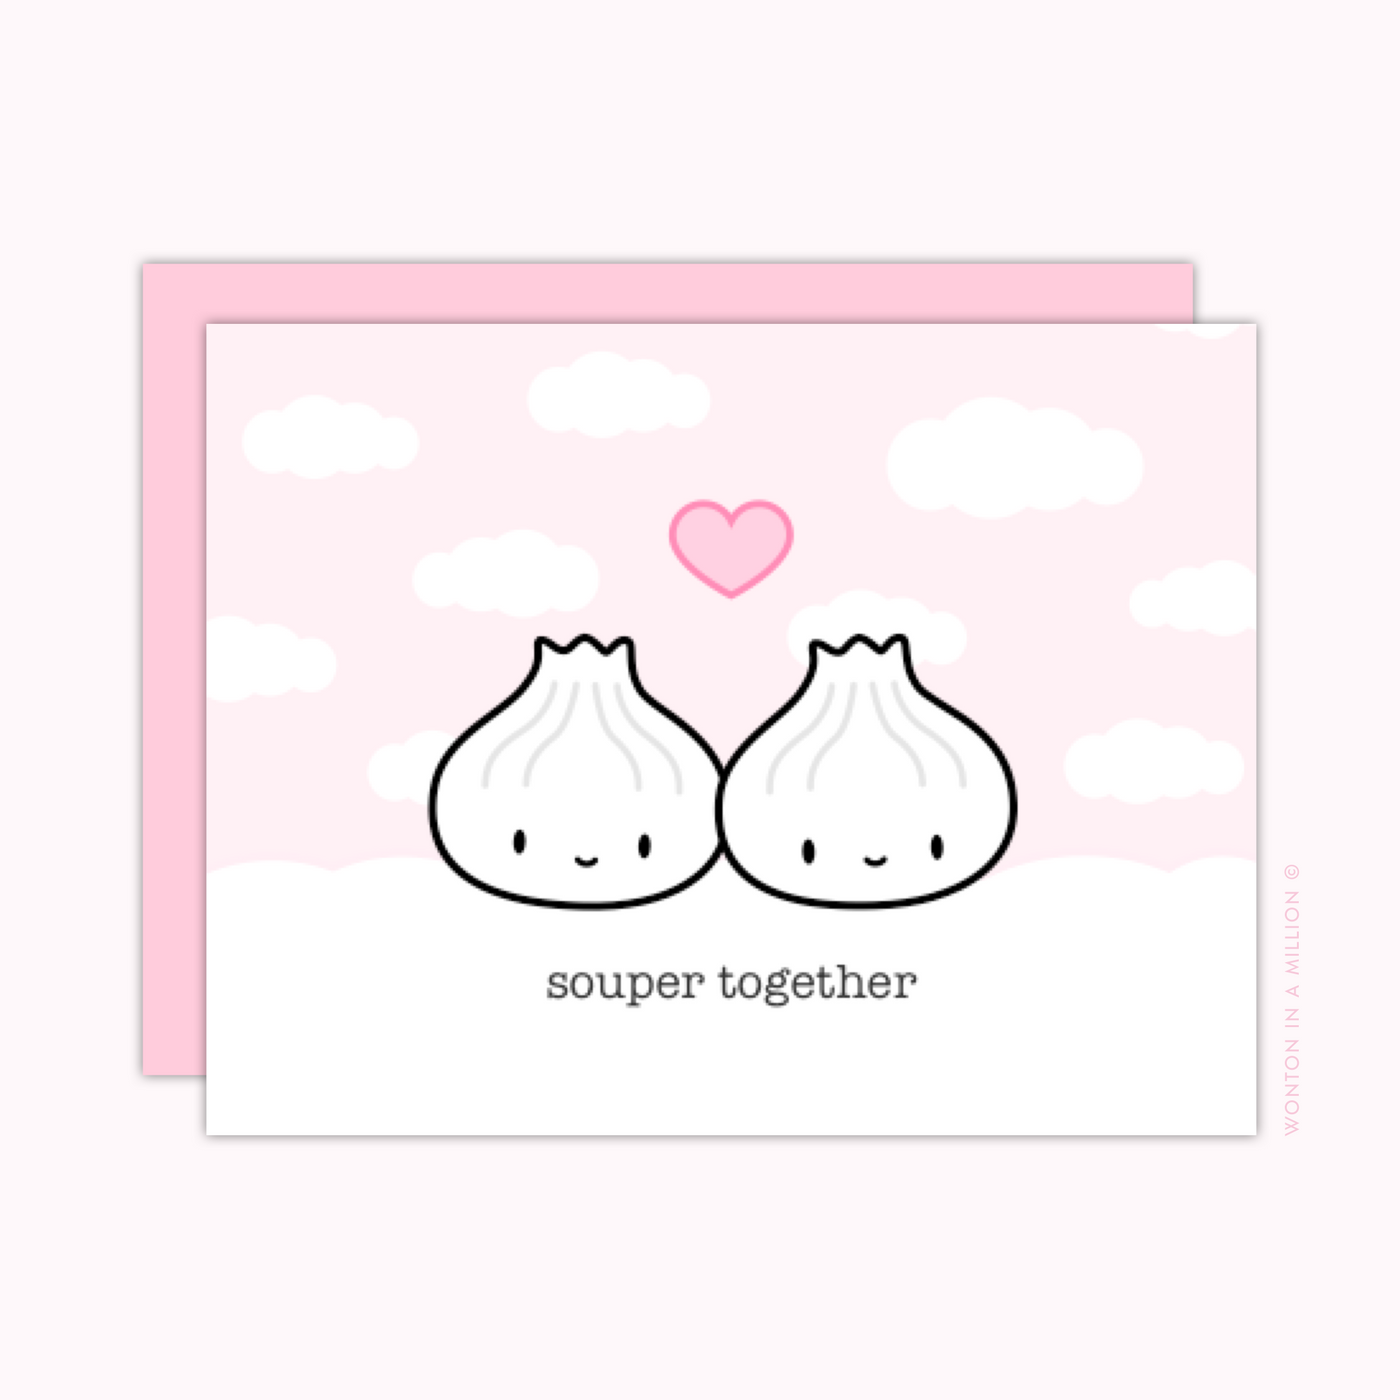 C007 | "Souper Together" Greeting Card (A2)